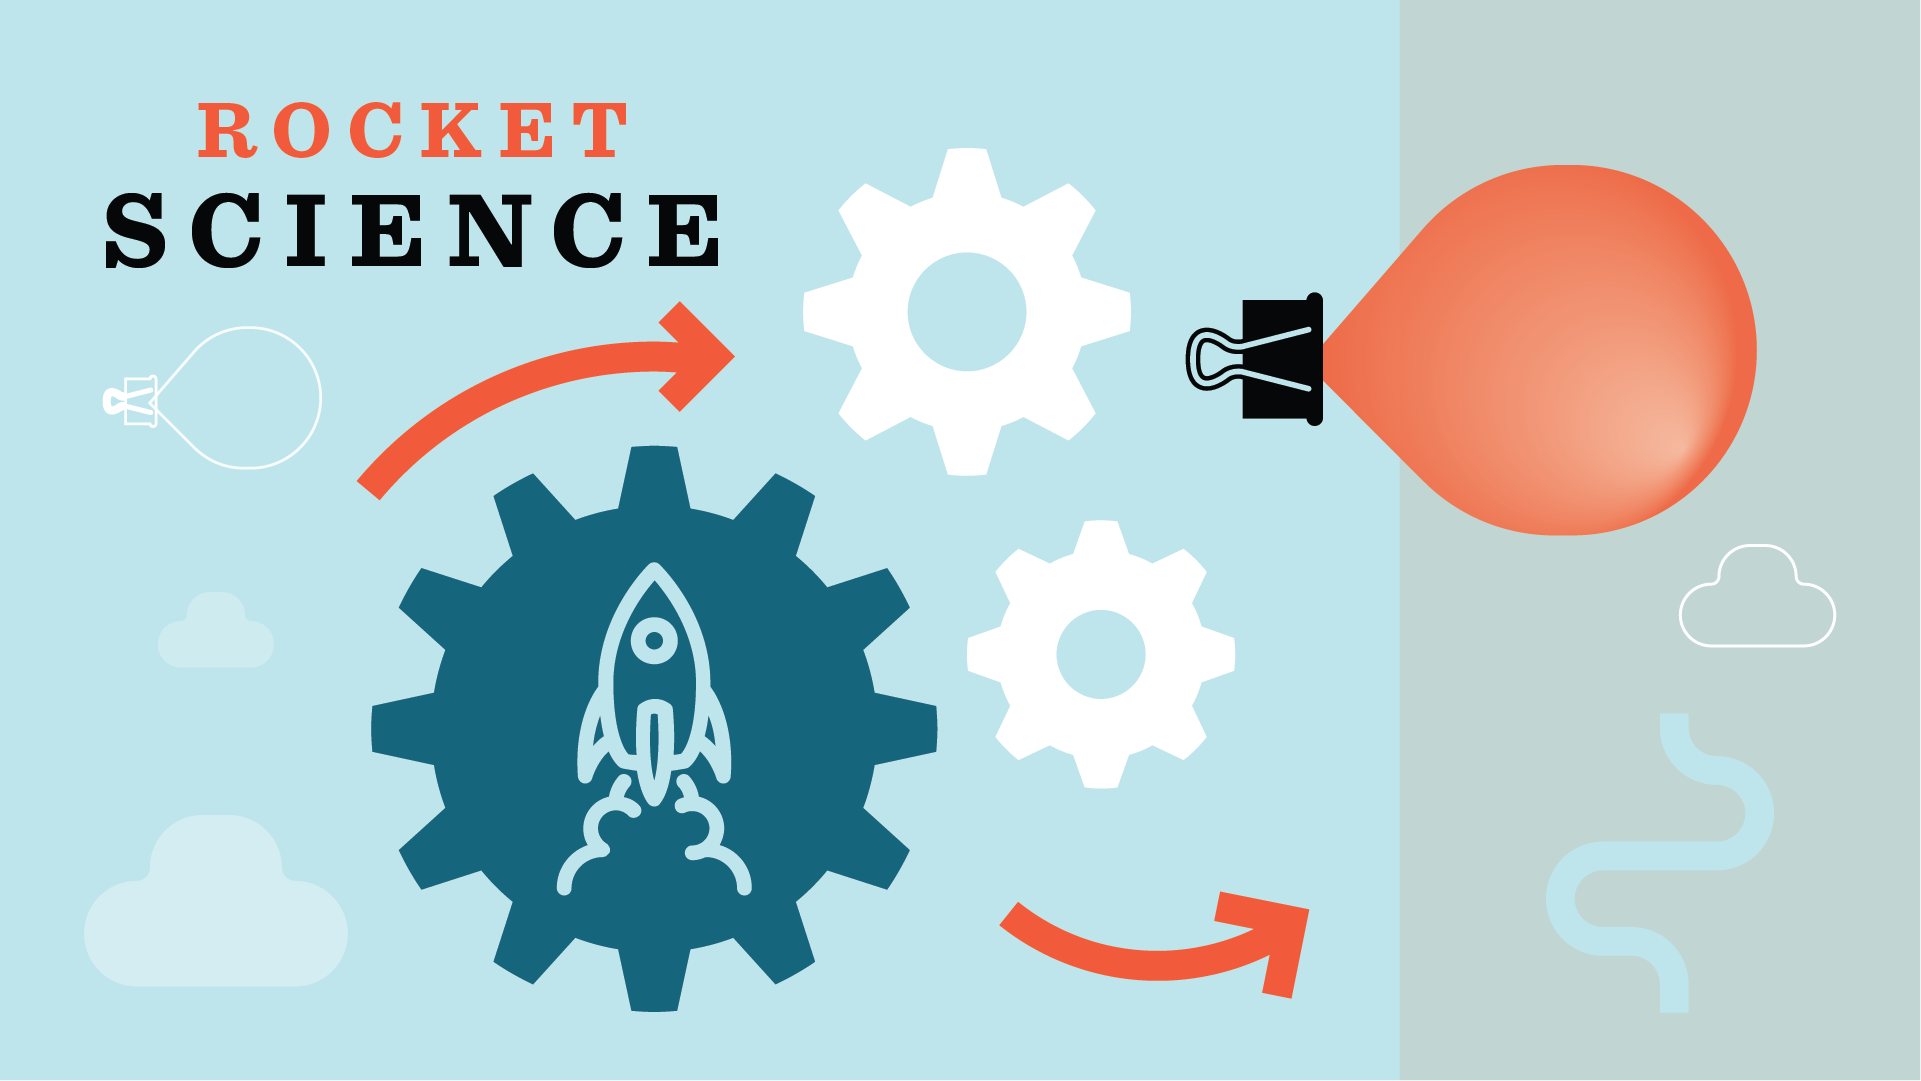 Graphic showing cogs, balloon, binder clip, clouds and rocket with the words "Rocket Science"